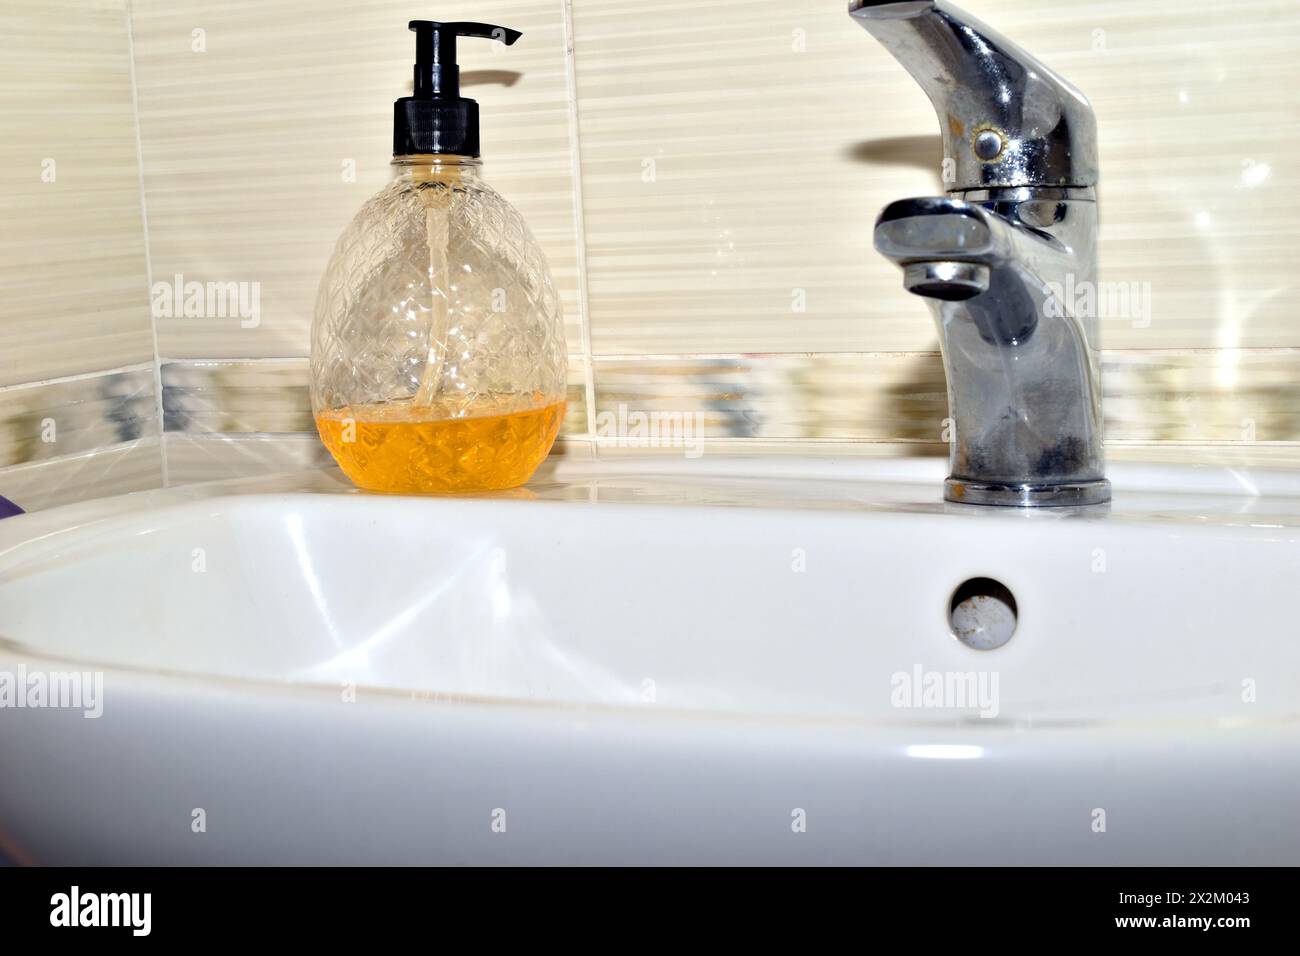 On the washbasin in the bathroom there is a bottle of yellow liquid soap. Stock Photo